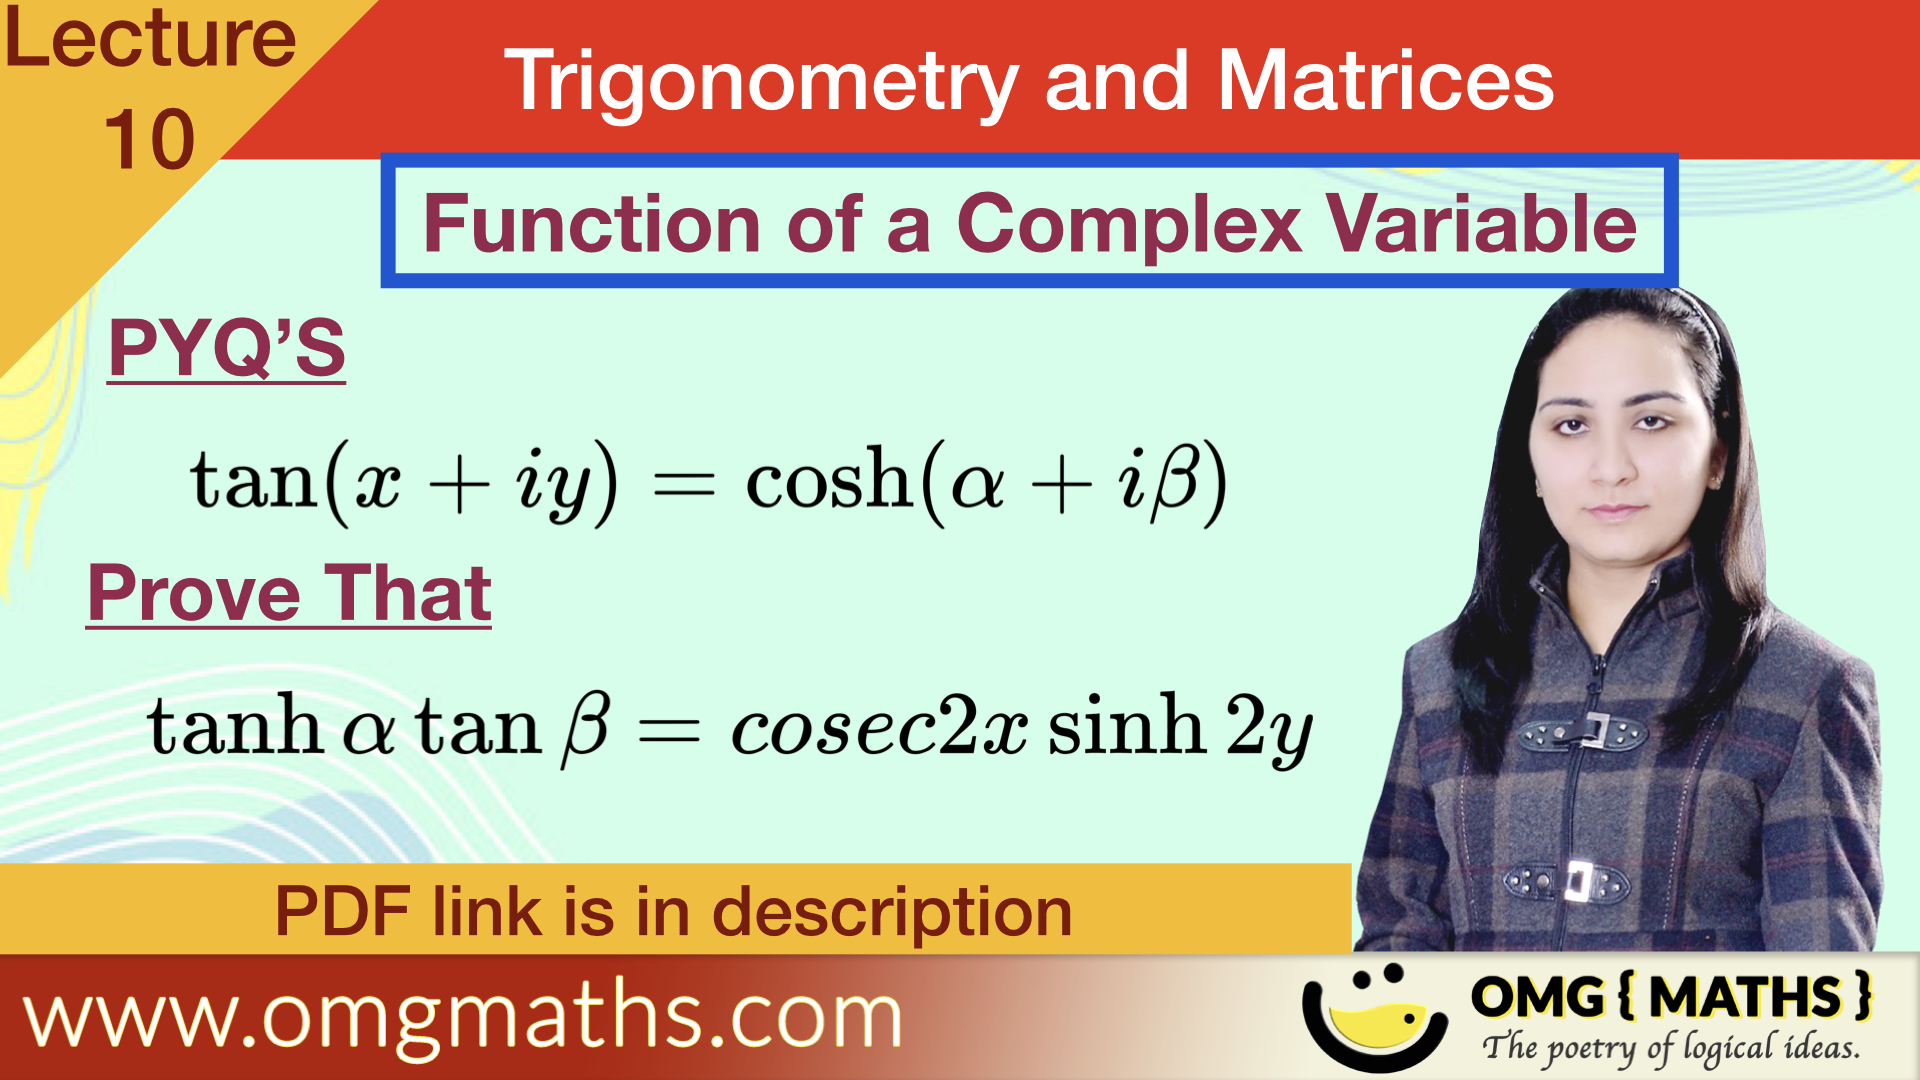 tan(theta+iphi) = cosh(a+ib) | Function of a complex variable | pyq | Bsc | Trigonometry and Matrices